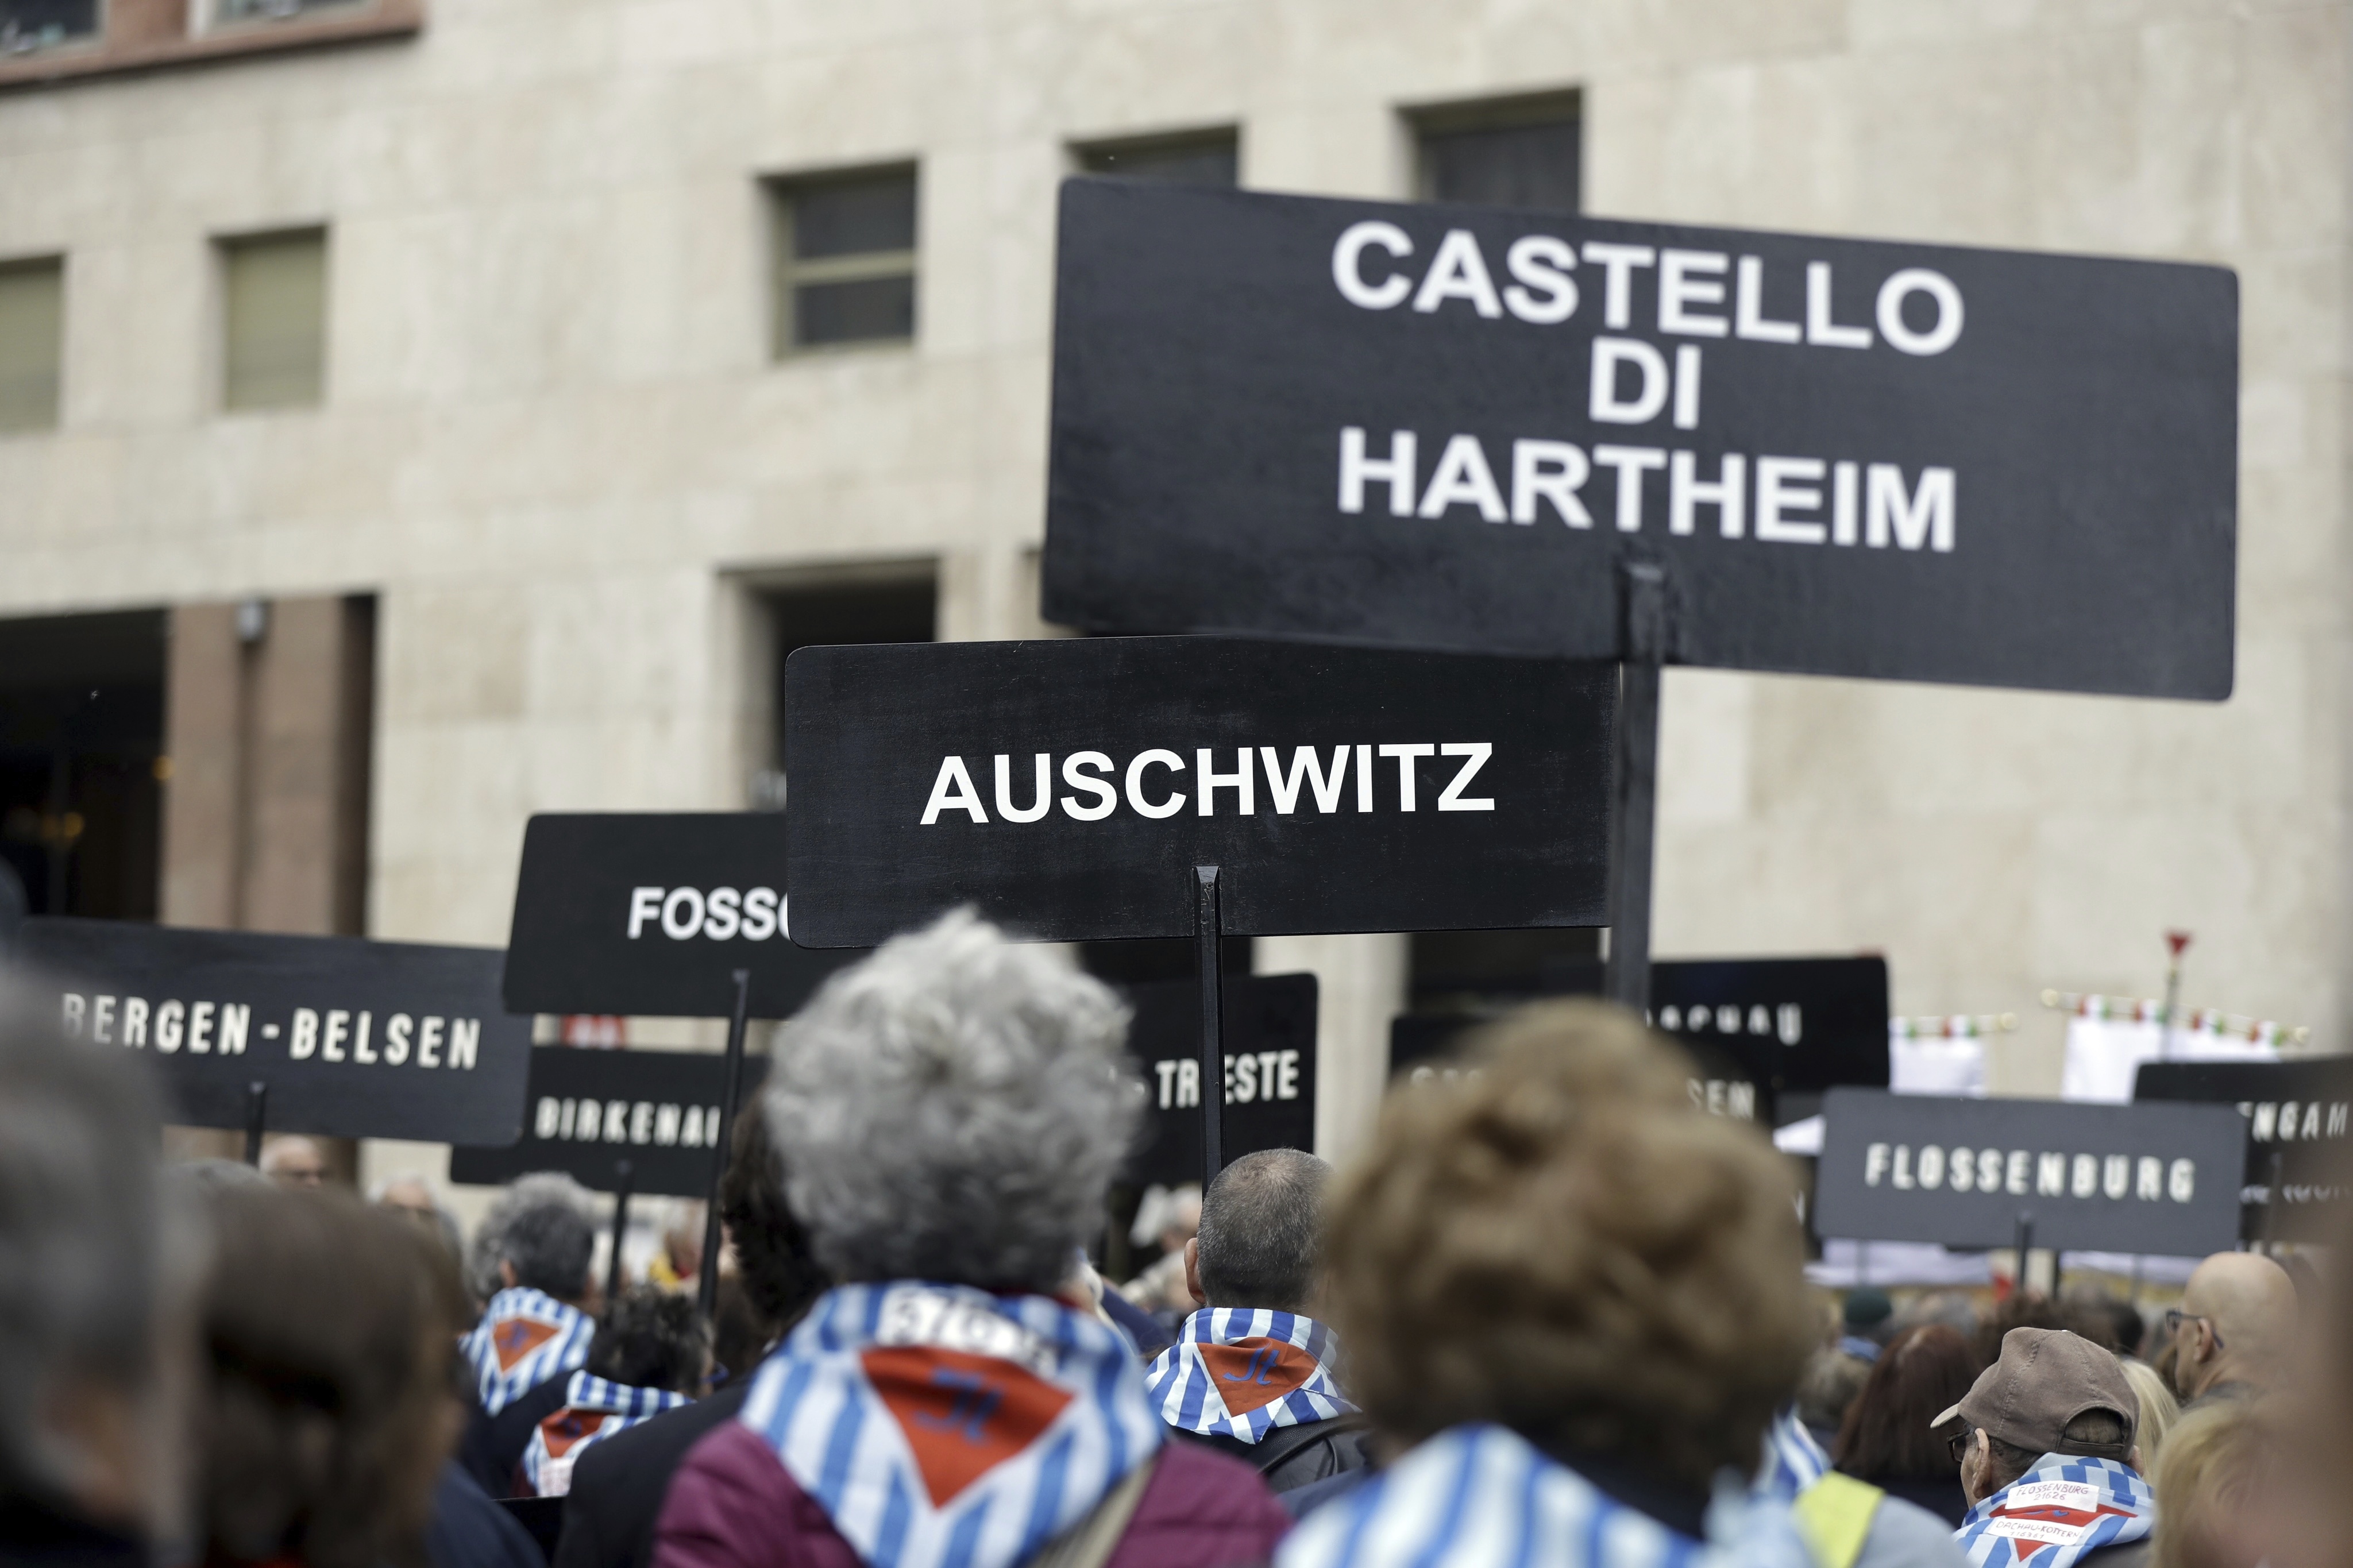 People hold signs reading the names of Nazi concentration camps during a demonstration to mark Italy's Liberation day, in Milan, Italy, Tuesday, April 25, 2017. Italy is celebrating the anniversary of a partisan uprising against the Nazis and their Fascist allies at the end of World War II. (AP Photo/Luca Bruno)